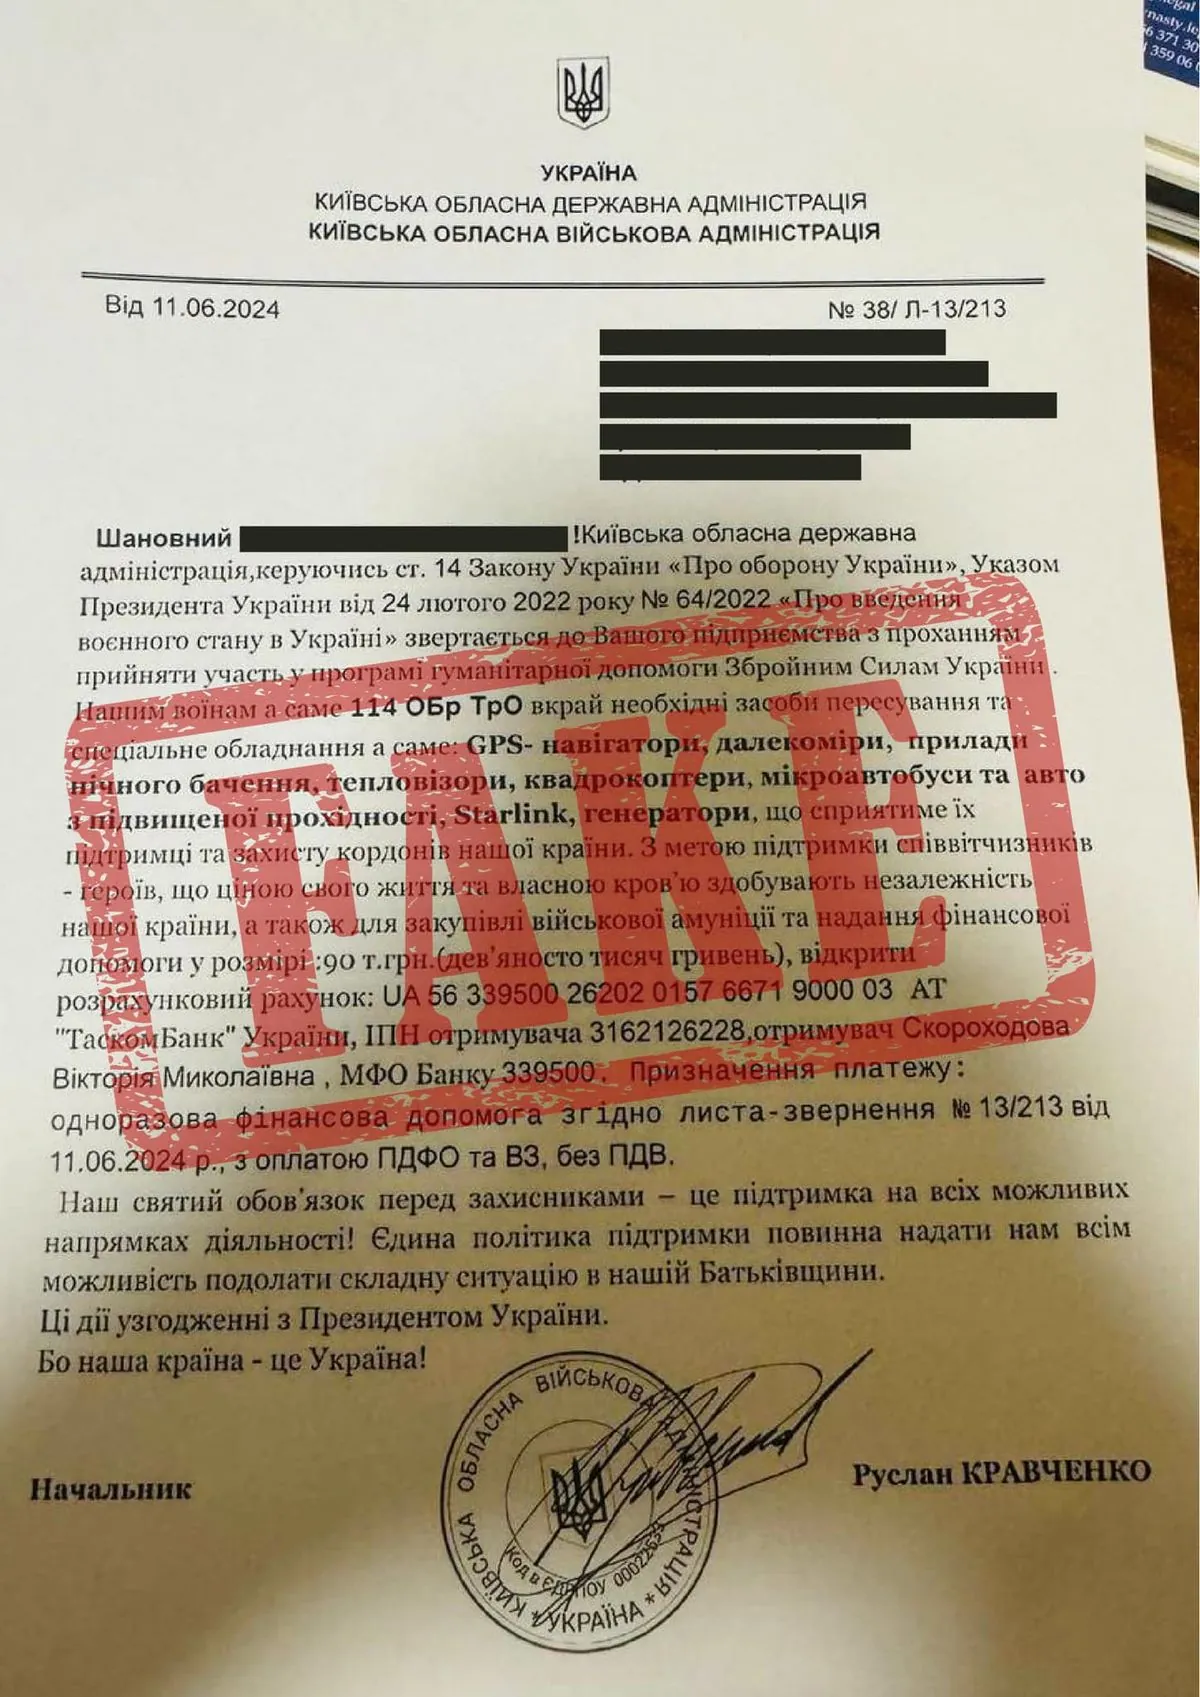 Unidentified persons send fake letters on behalf of the head of the Kyiv RMA allegedly raising funds to help the military